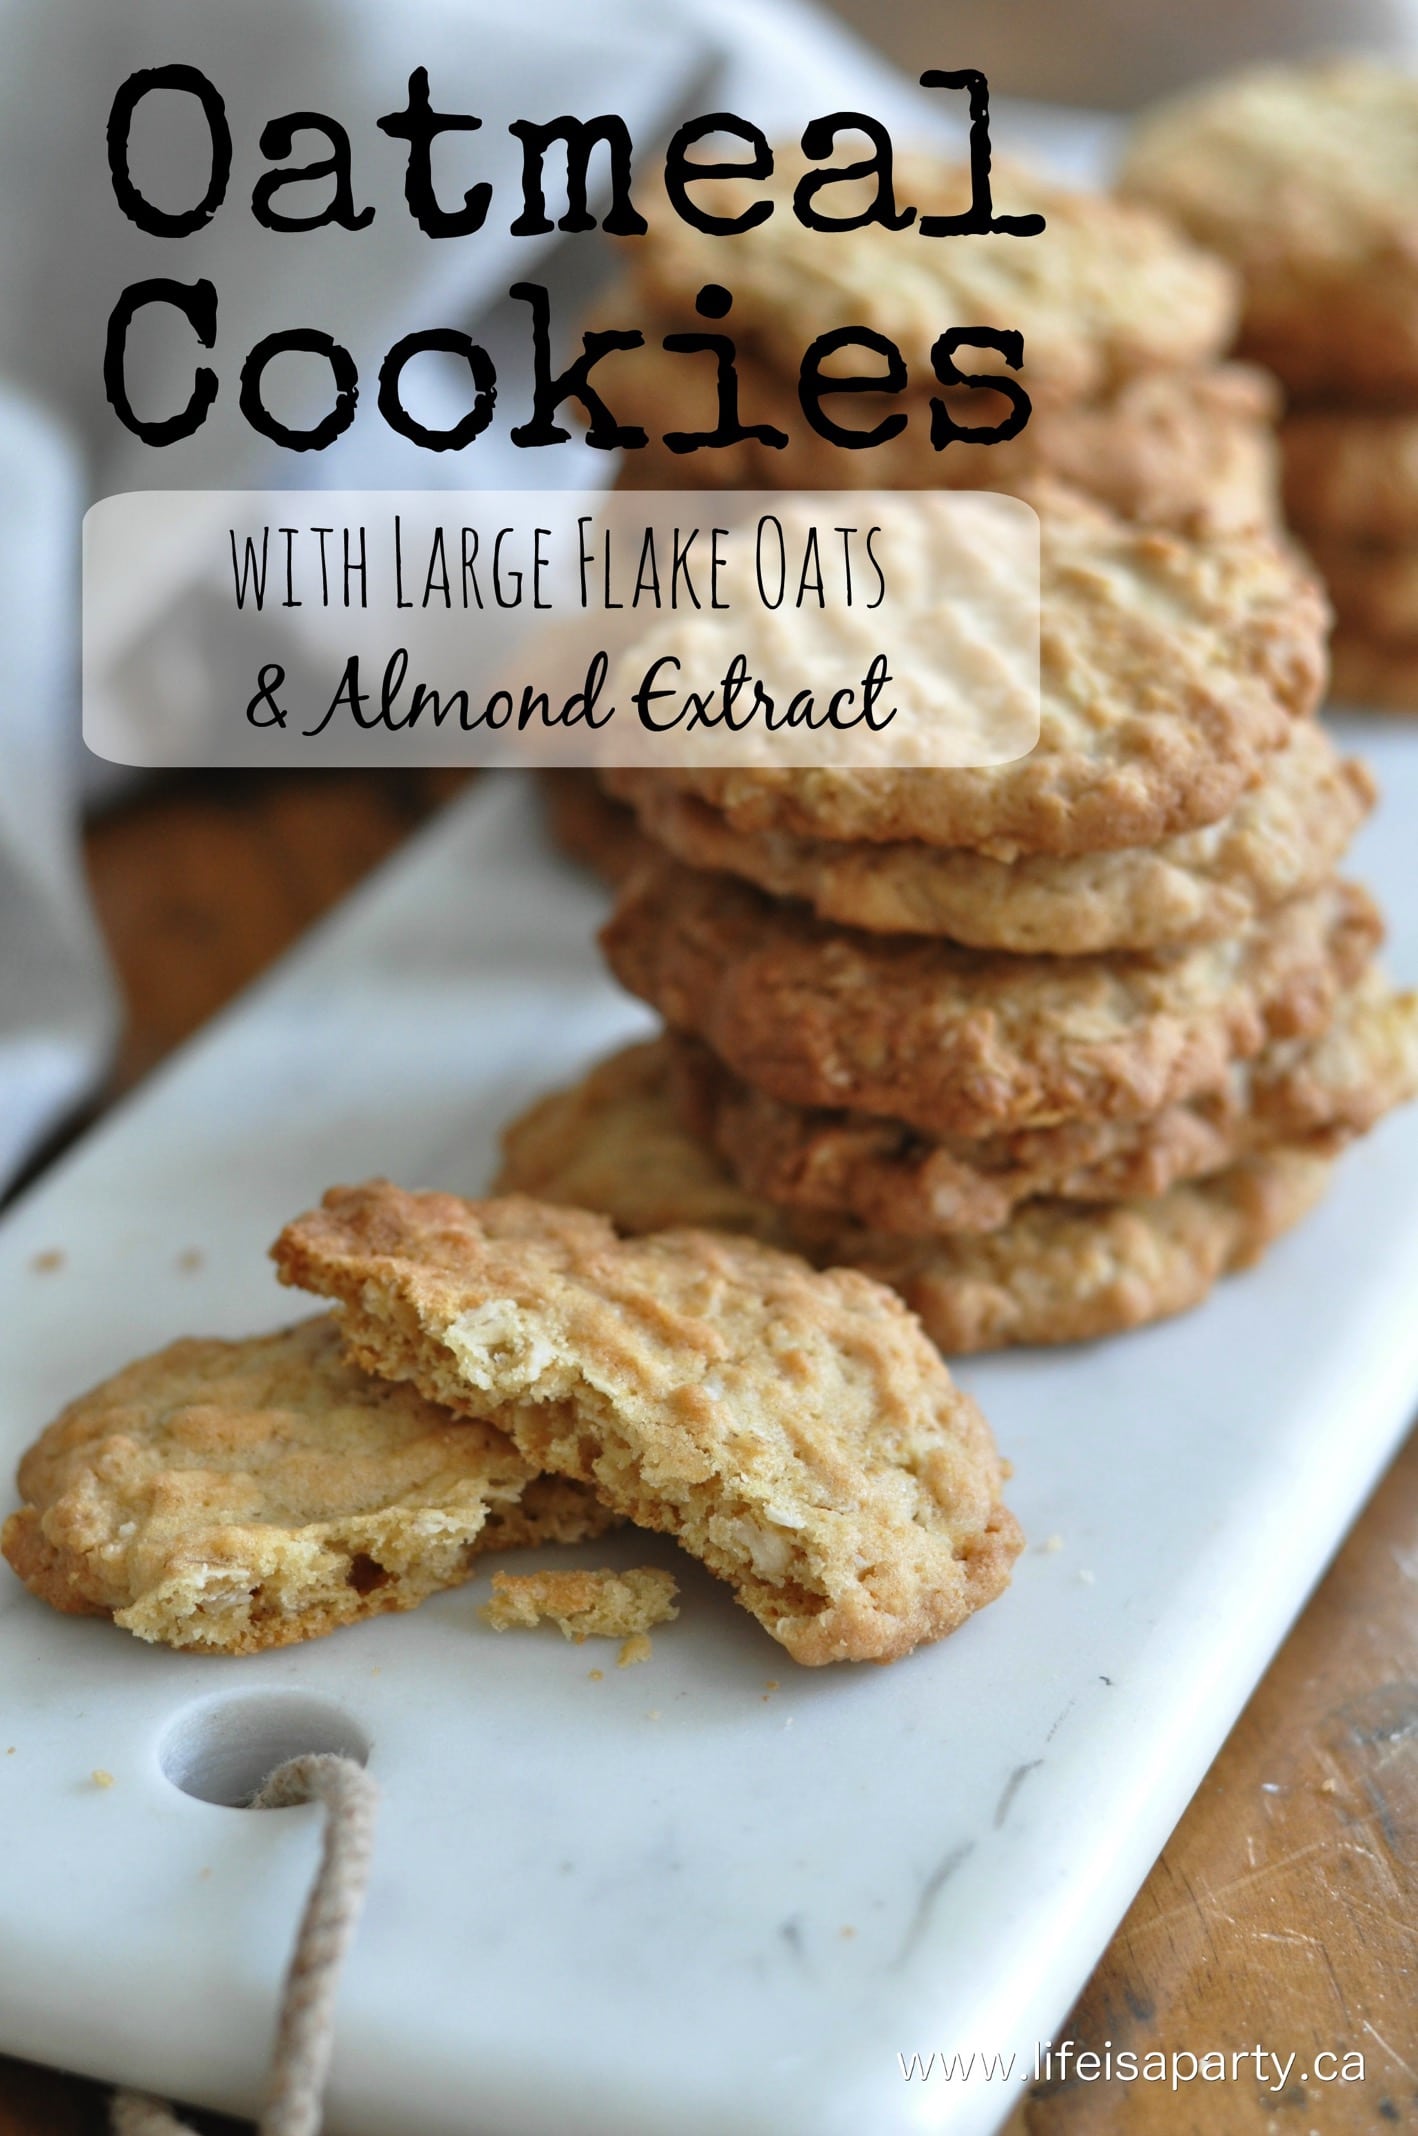 Large Flake Oatmeal Cookies: The addition of almond extract and large flake oats make these not your average oatmeal cookies.